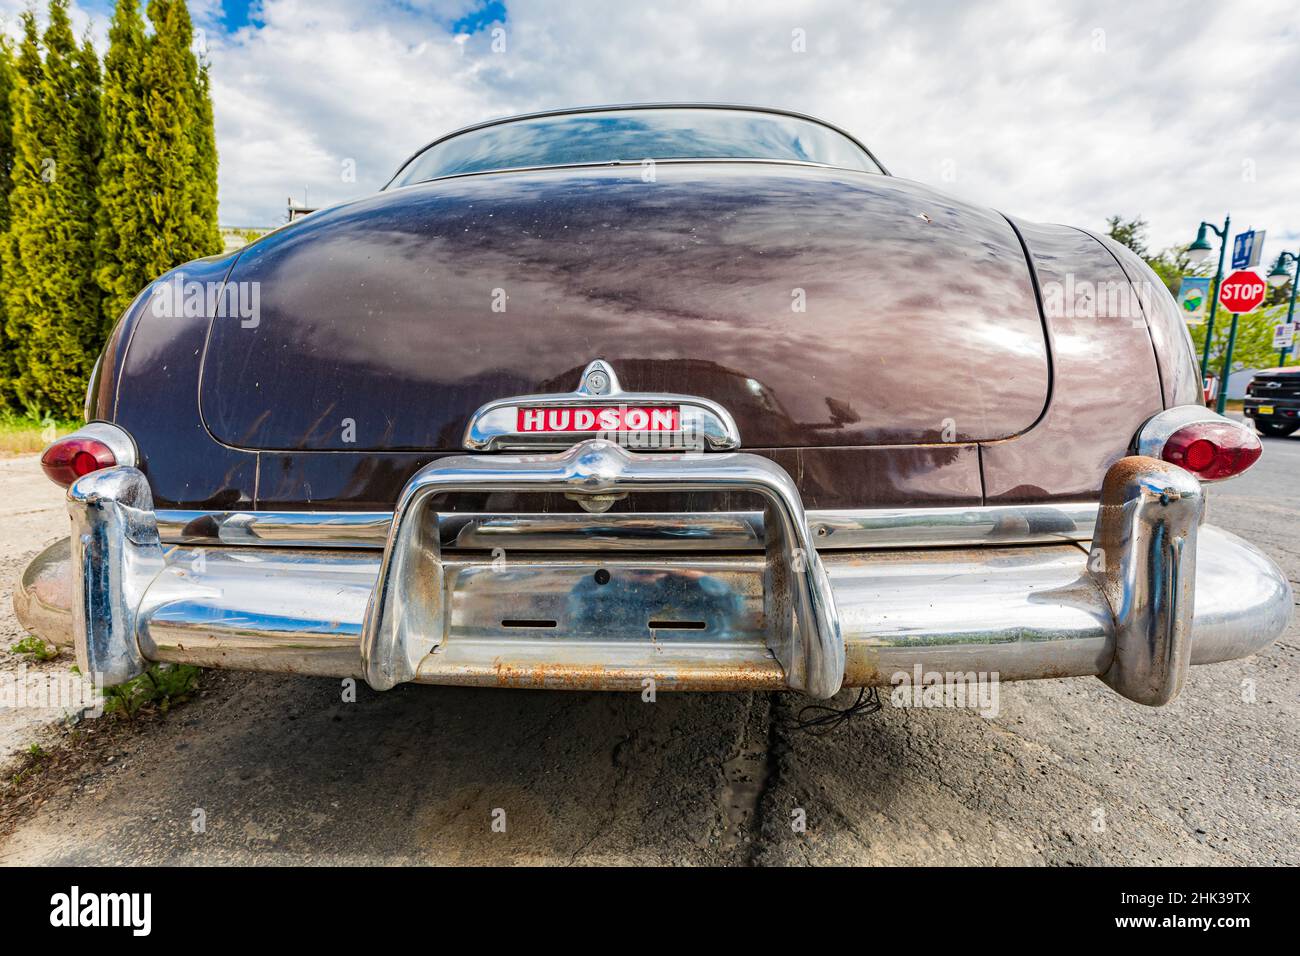 Palouse, Washington State, USA. Chrome rear bumper of a vintage Hudson Wasp. (Editorial Use Only) Stock Photo